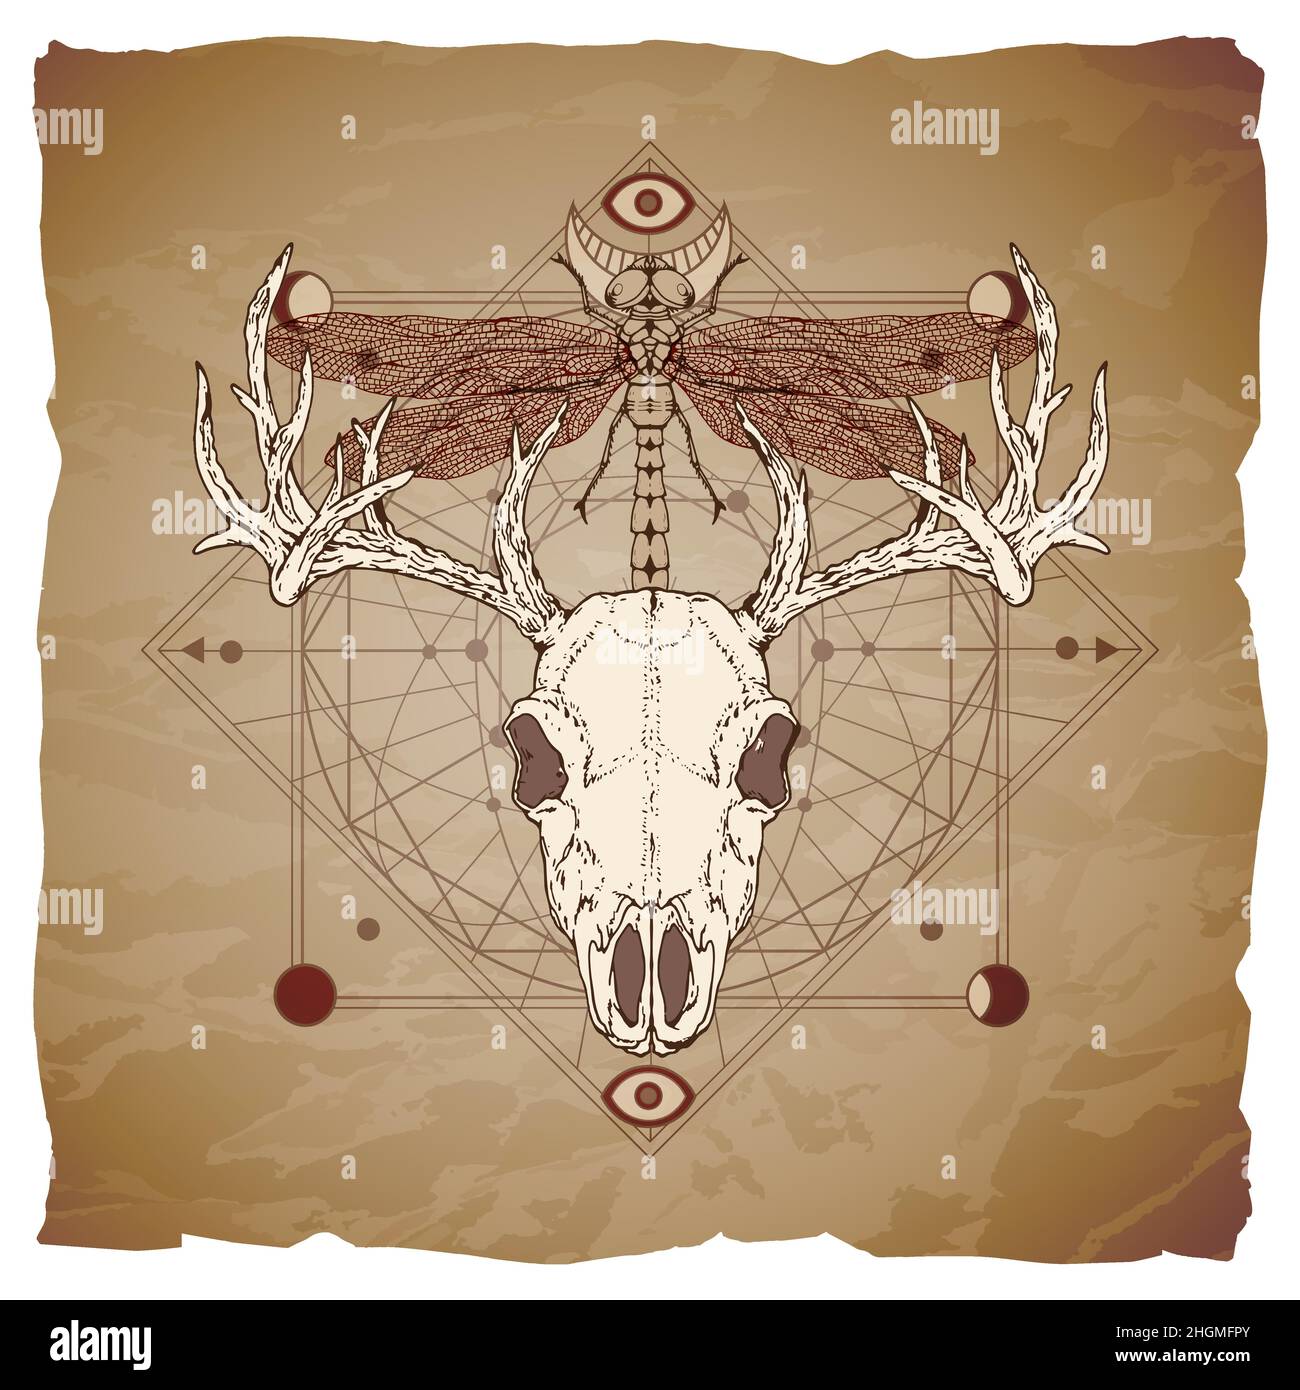 Vector illustration with hand drawn deer skull, dragonfly and Sacred geometric symbol on vintage paper background with torn edges. Abstract mystic sig Stock Vector